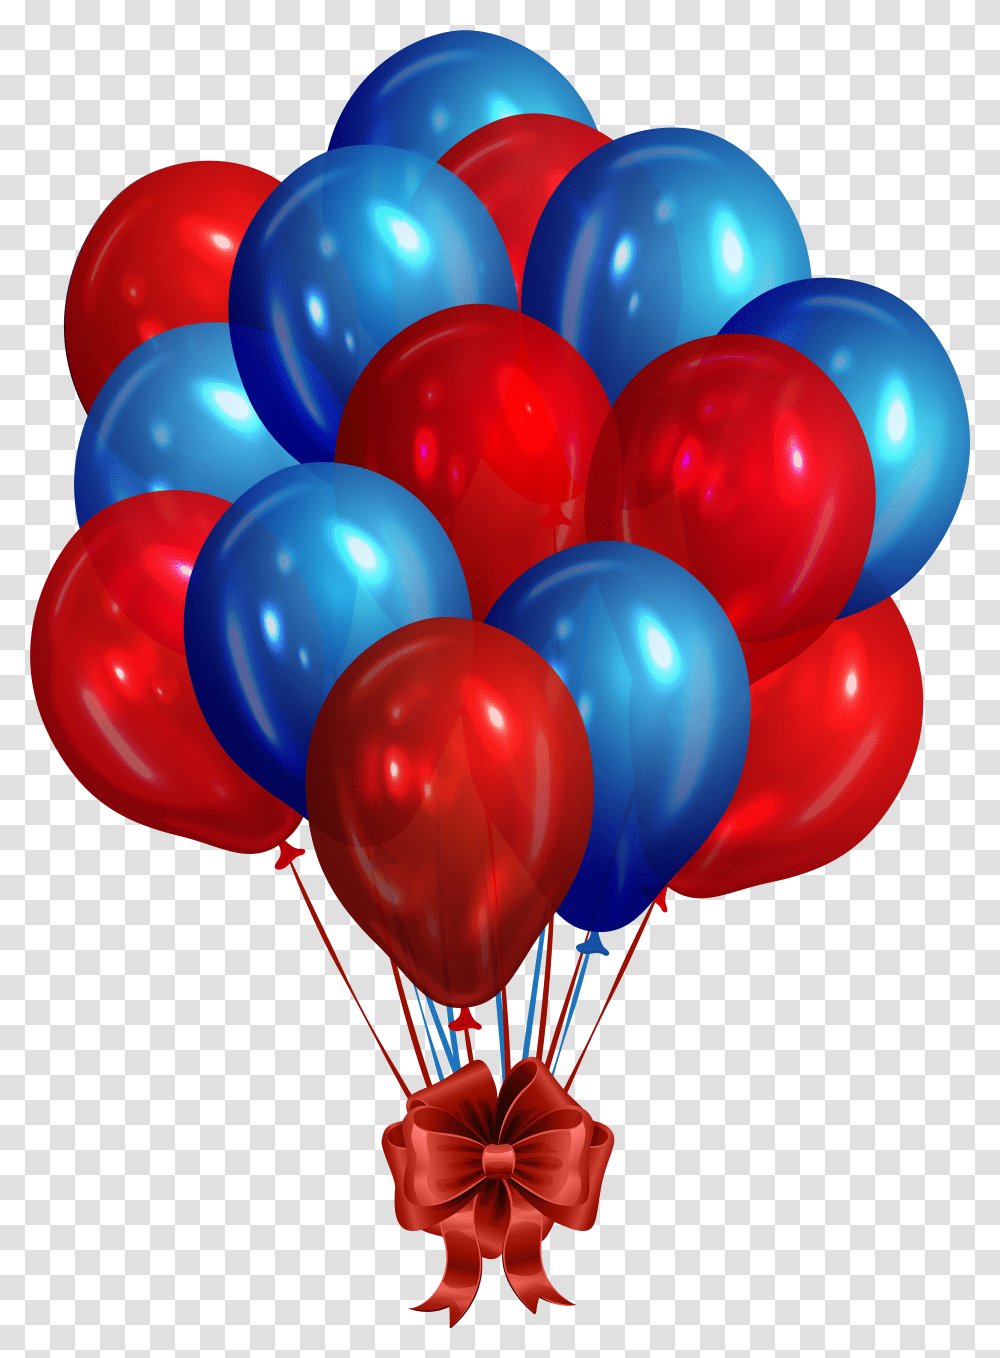 Graphic Free Download Blue Red Clip Art Blue And Red Balloons Transparent Png